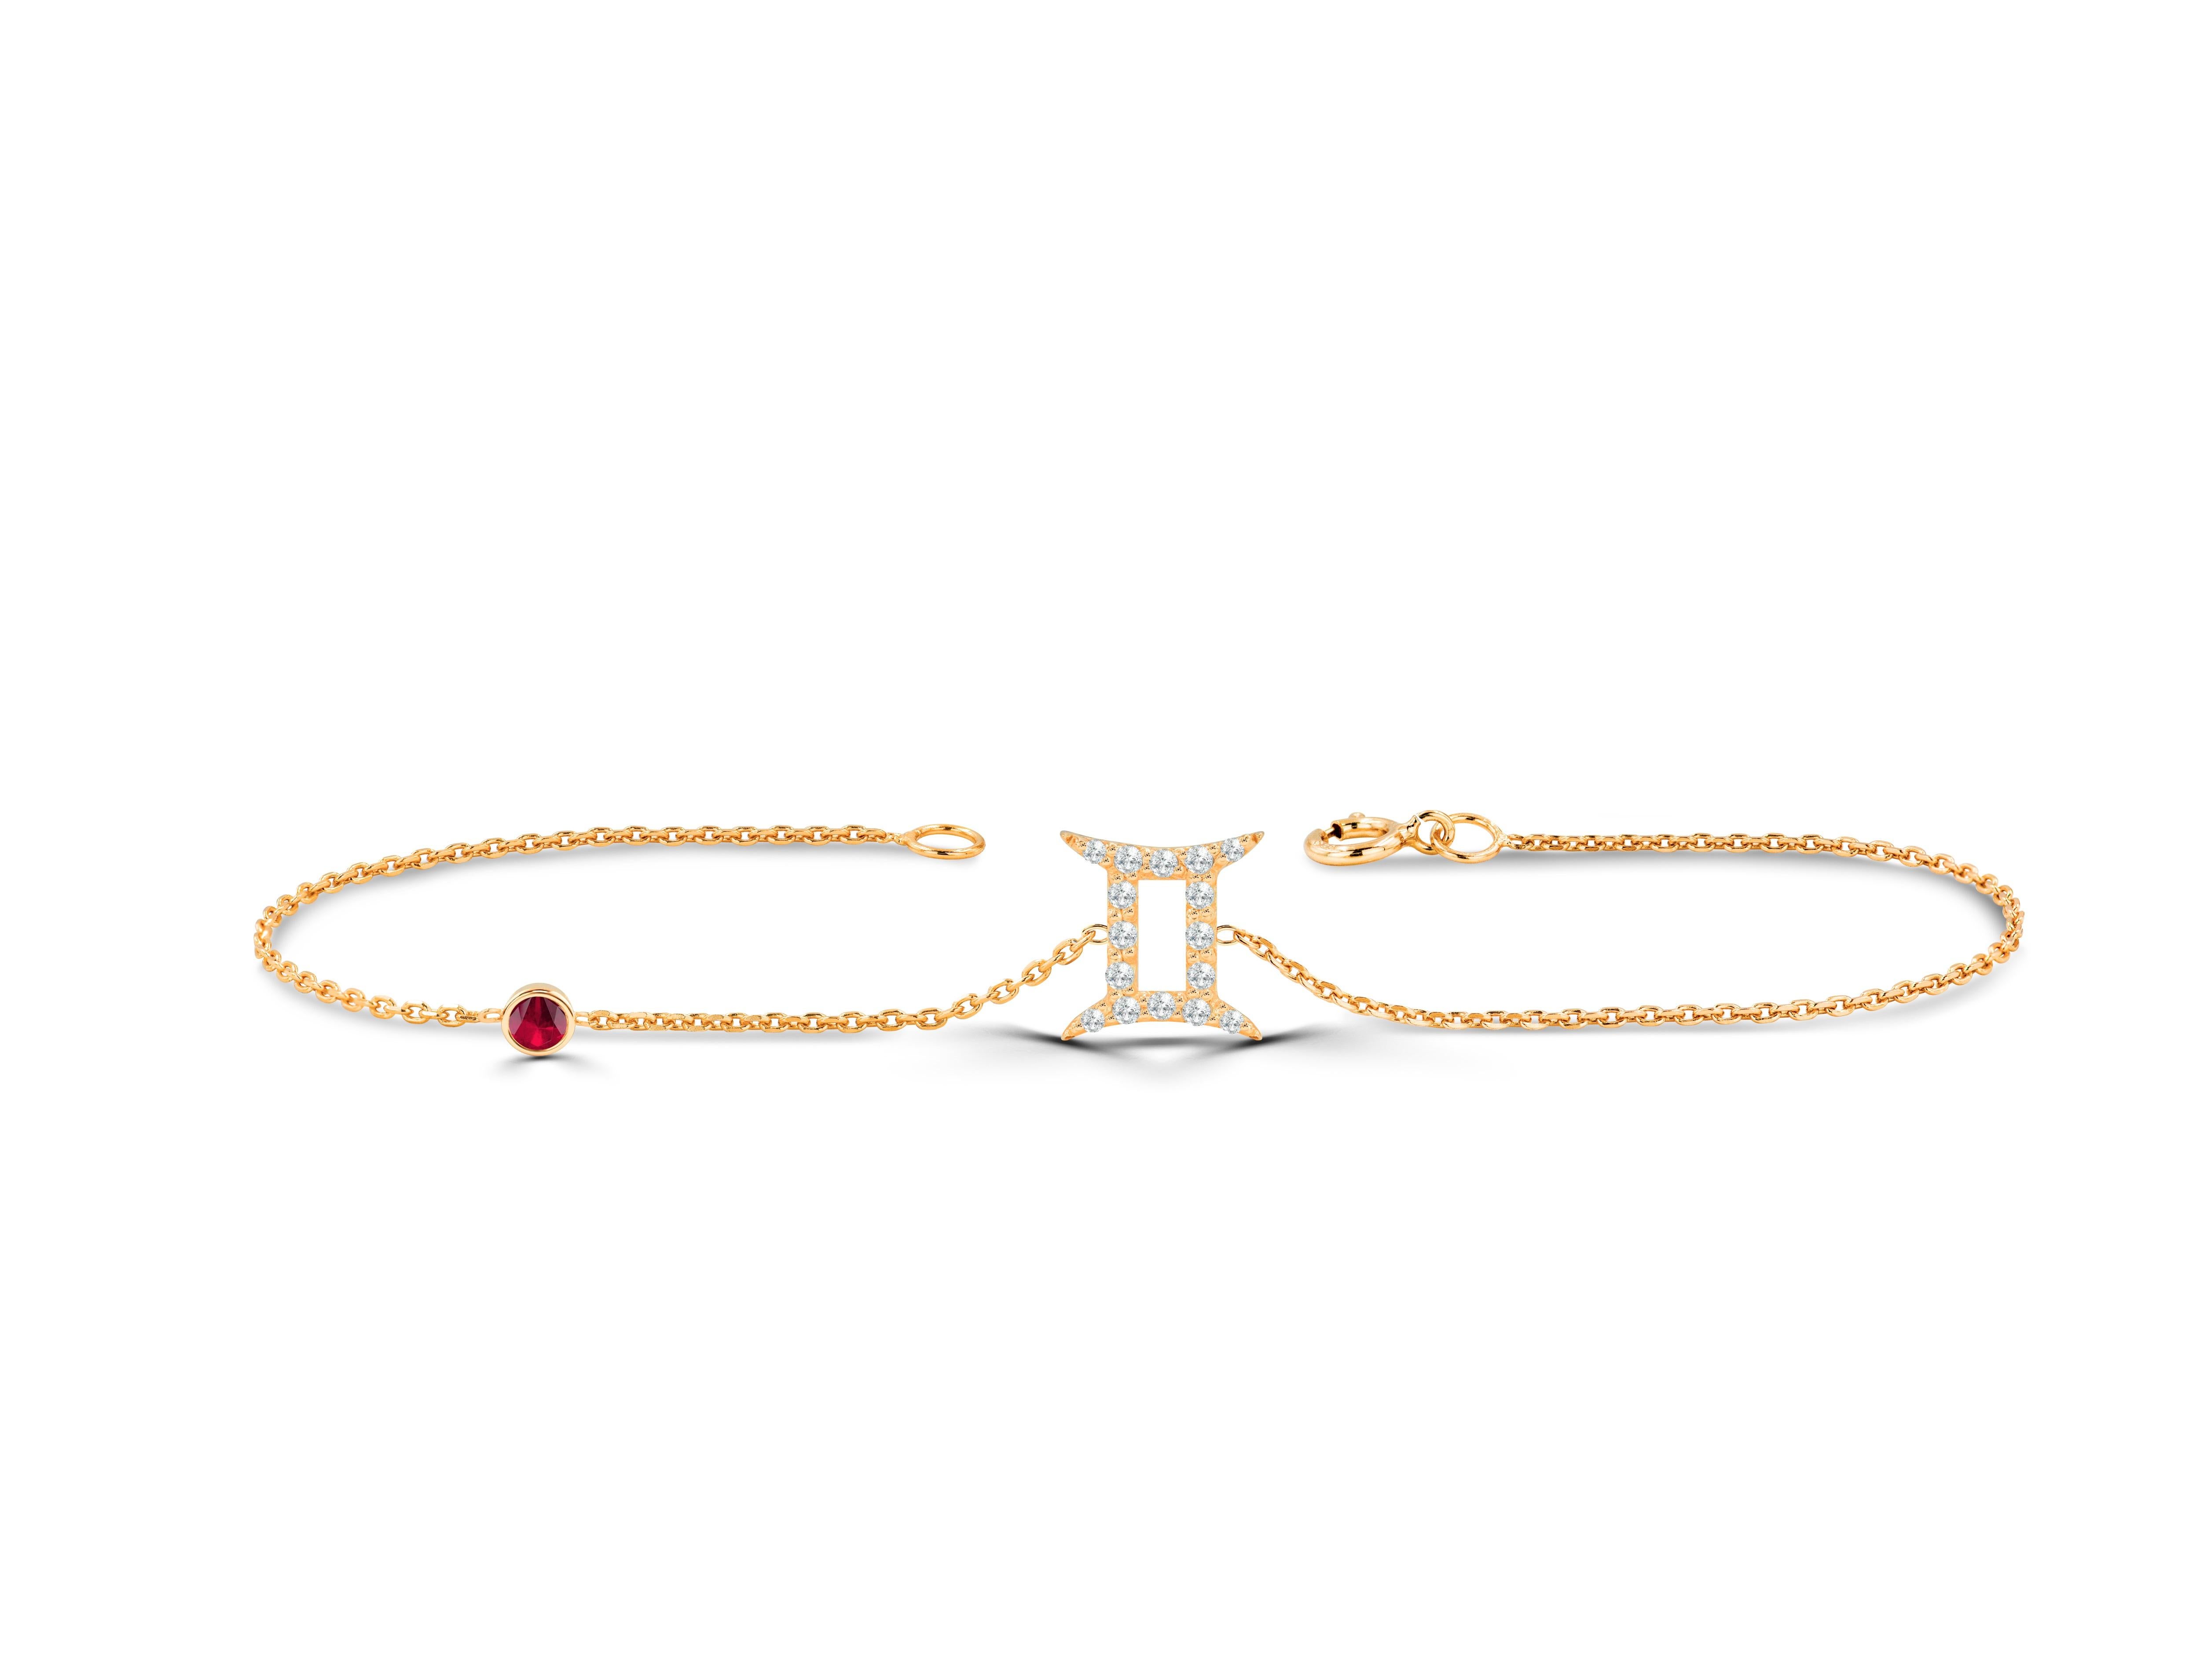 This Gemini Diamond Bracelet is meant to represent you. This Zodiac sign bracelet comes with a birthstone of your choice- Ruby, Sapphire, or Emerald. Our collection of zodiac jewelry includes this stunning Diamond Gemini Bracelet. All Geminis out